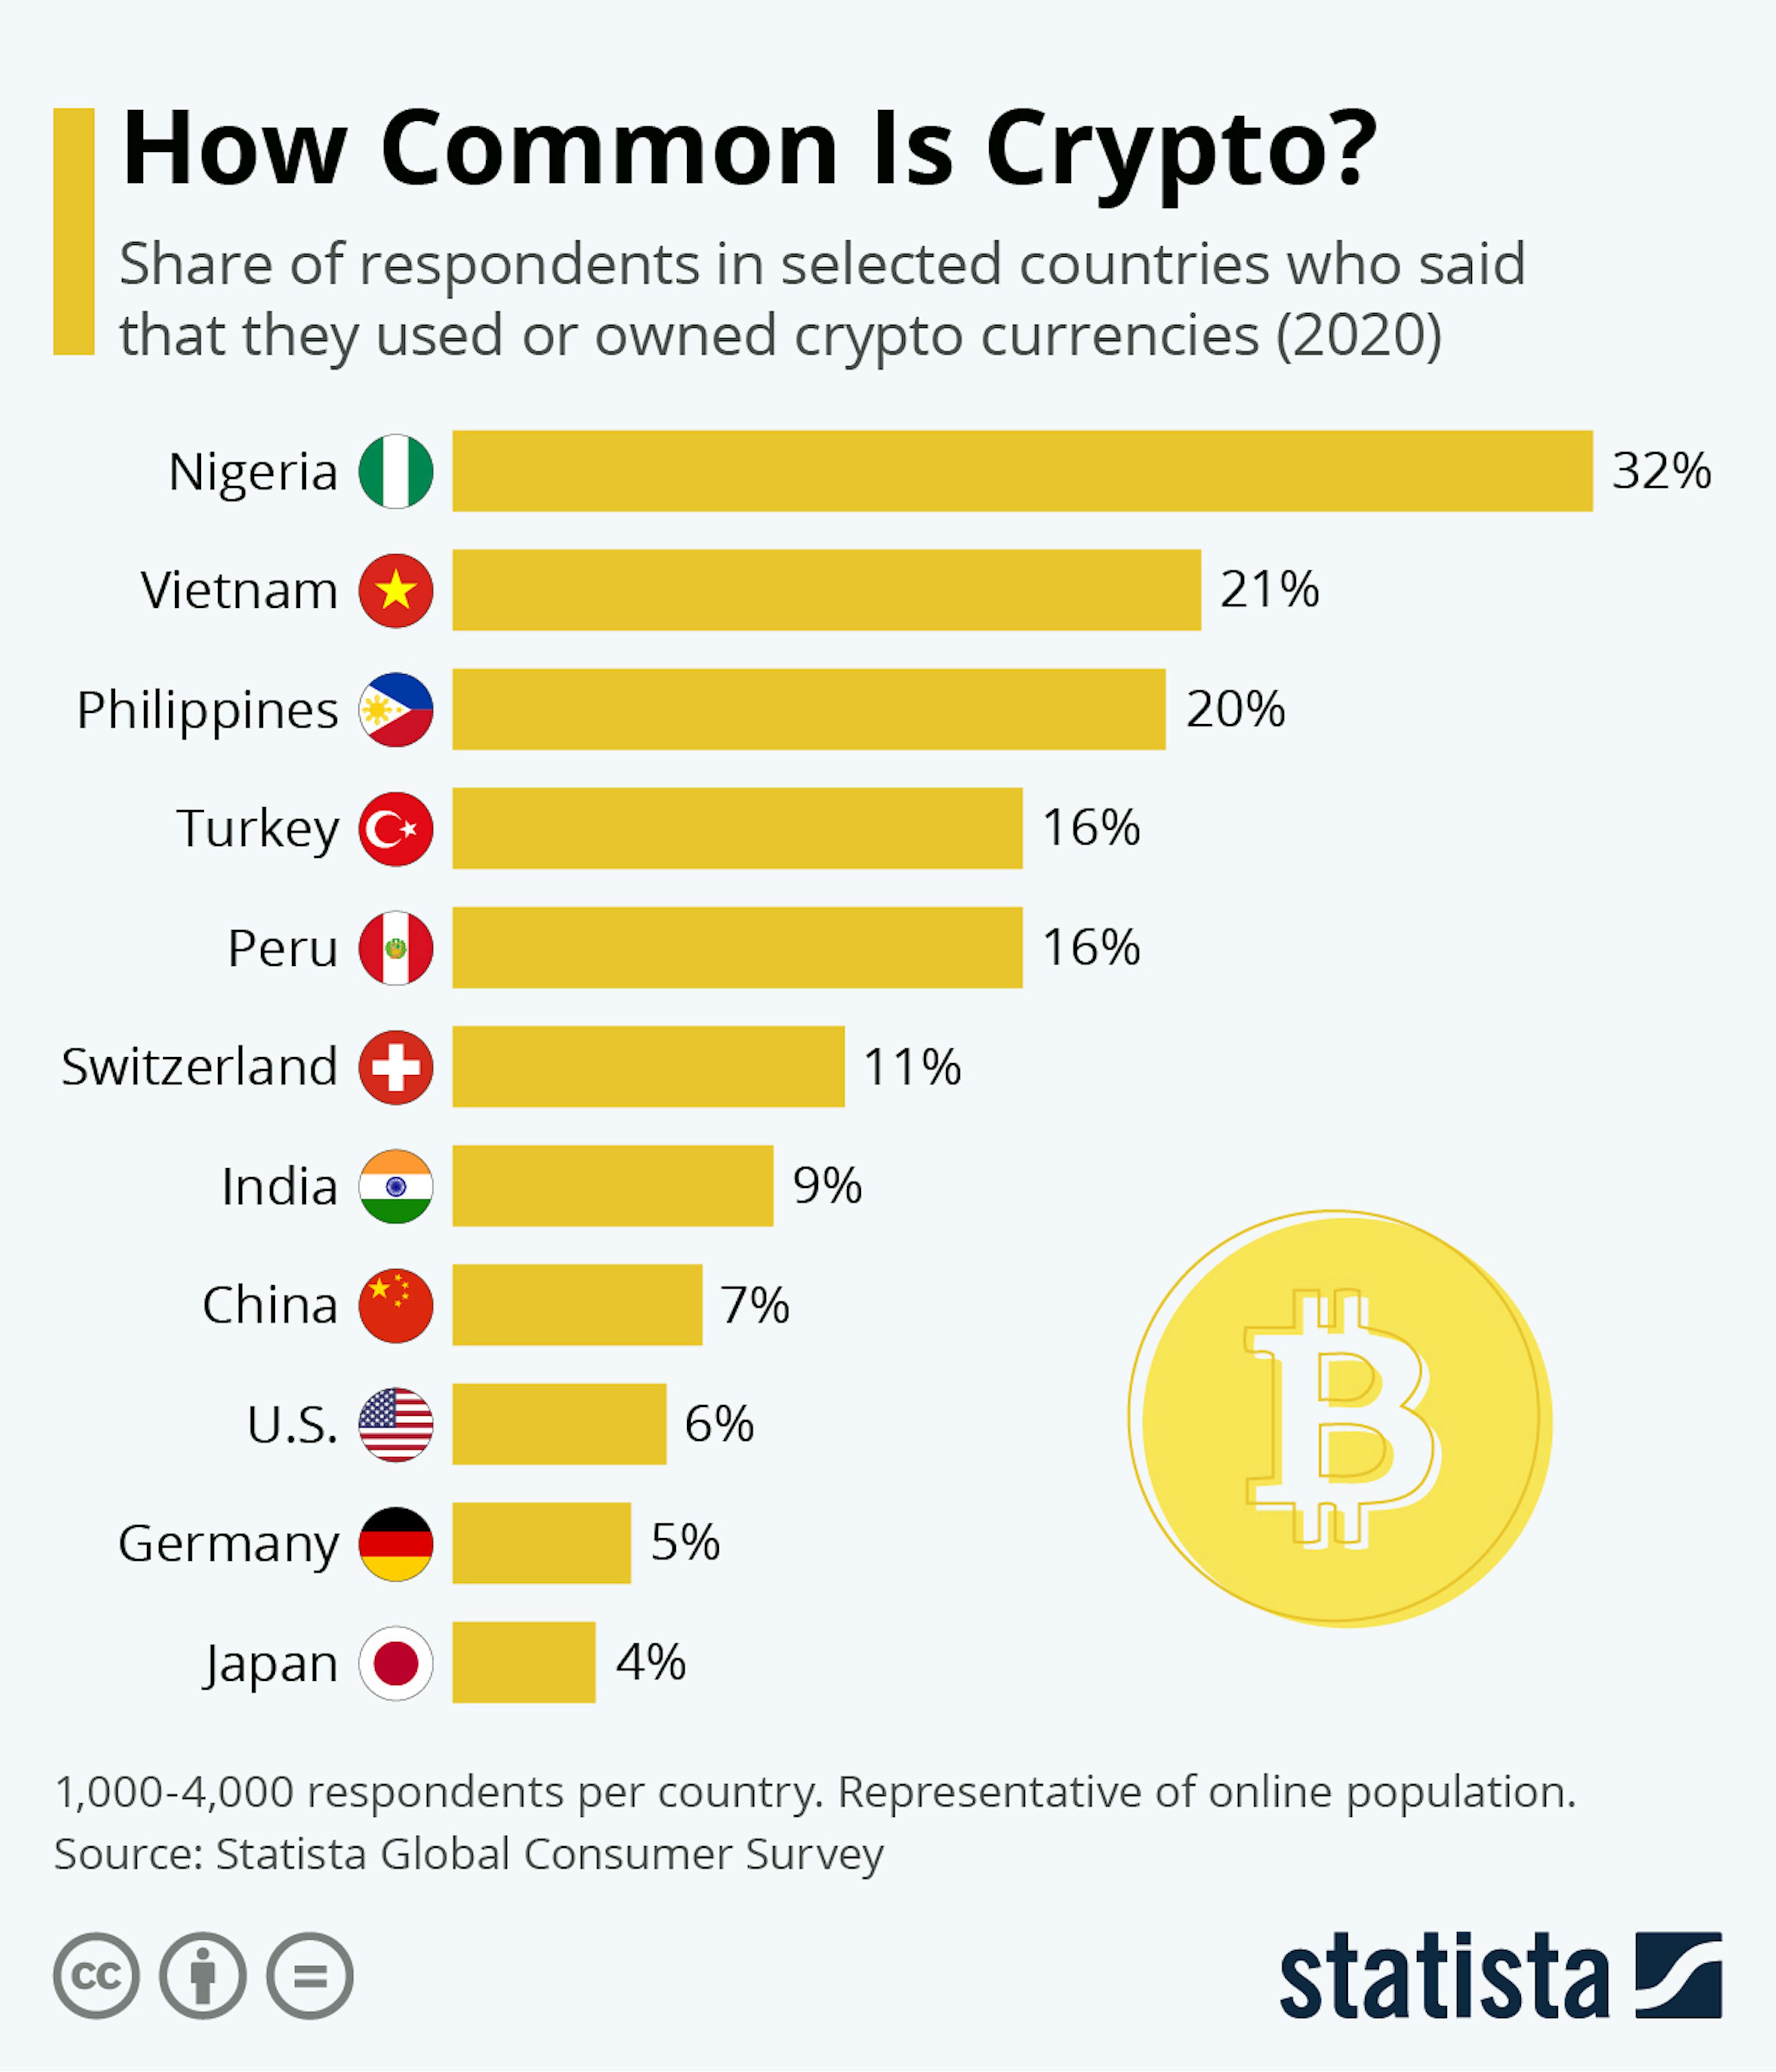 Crypto is most common in Nigeria